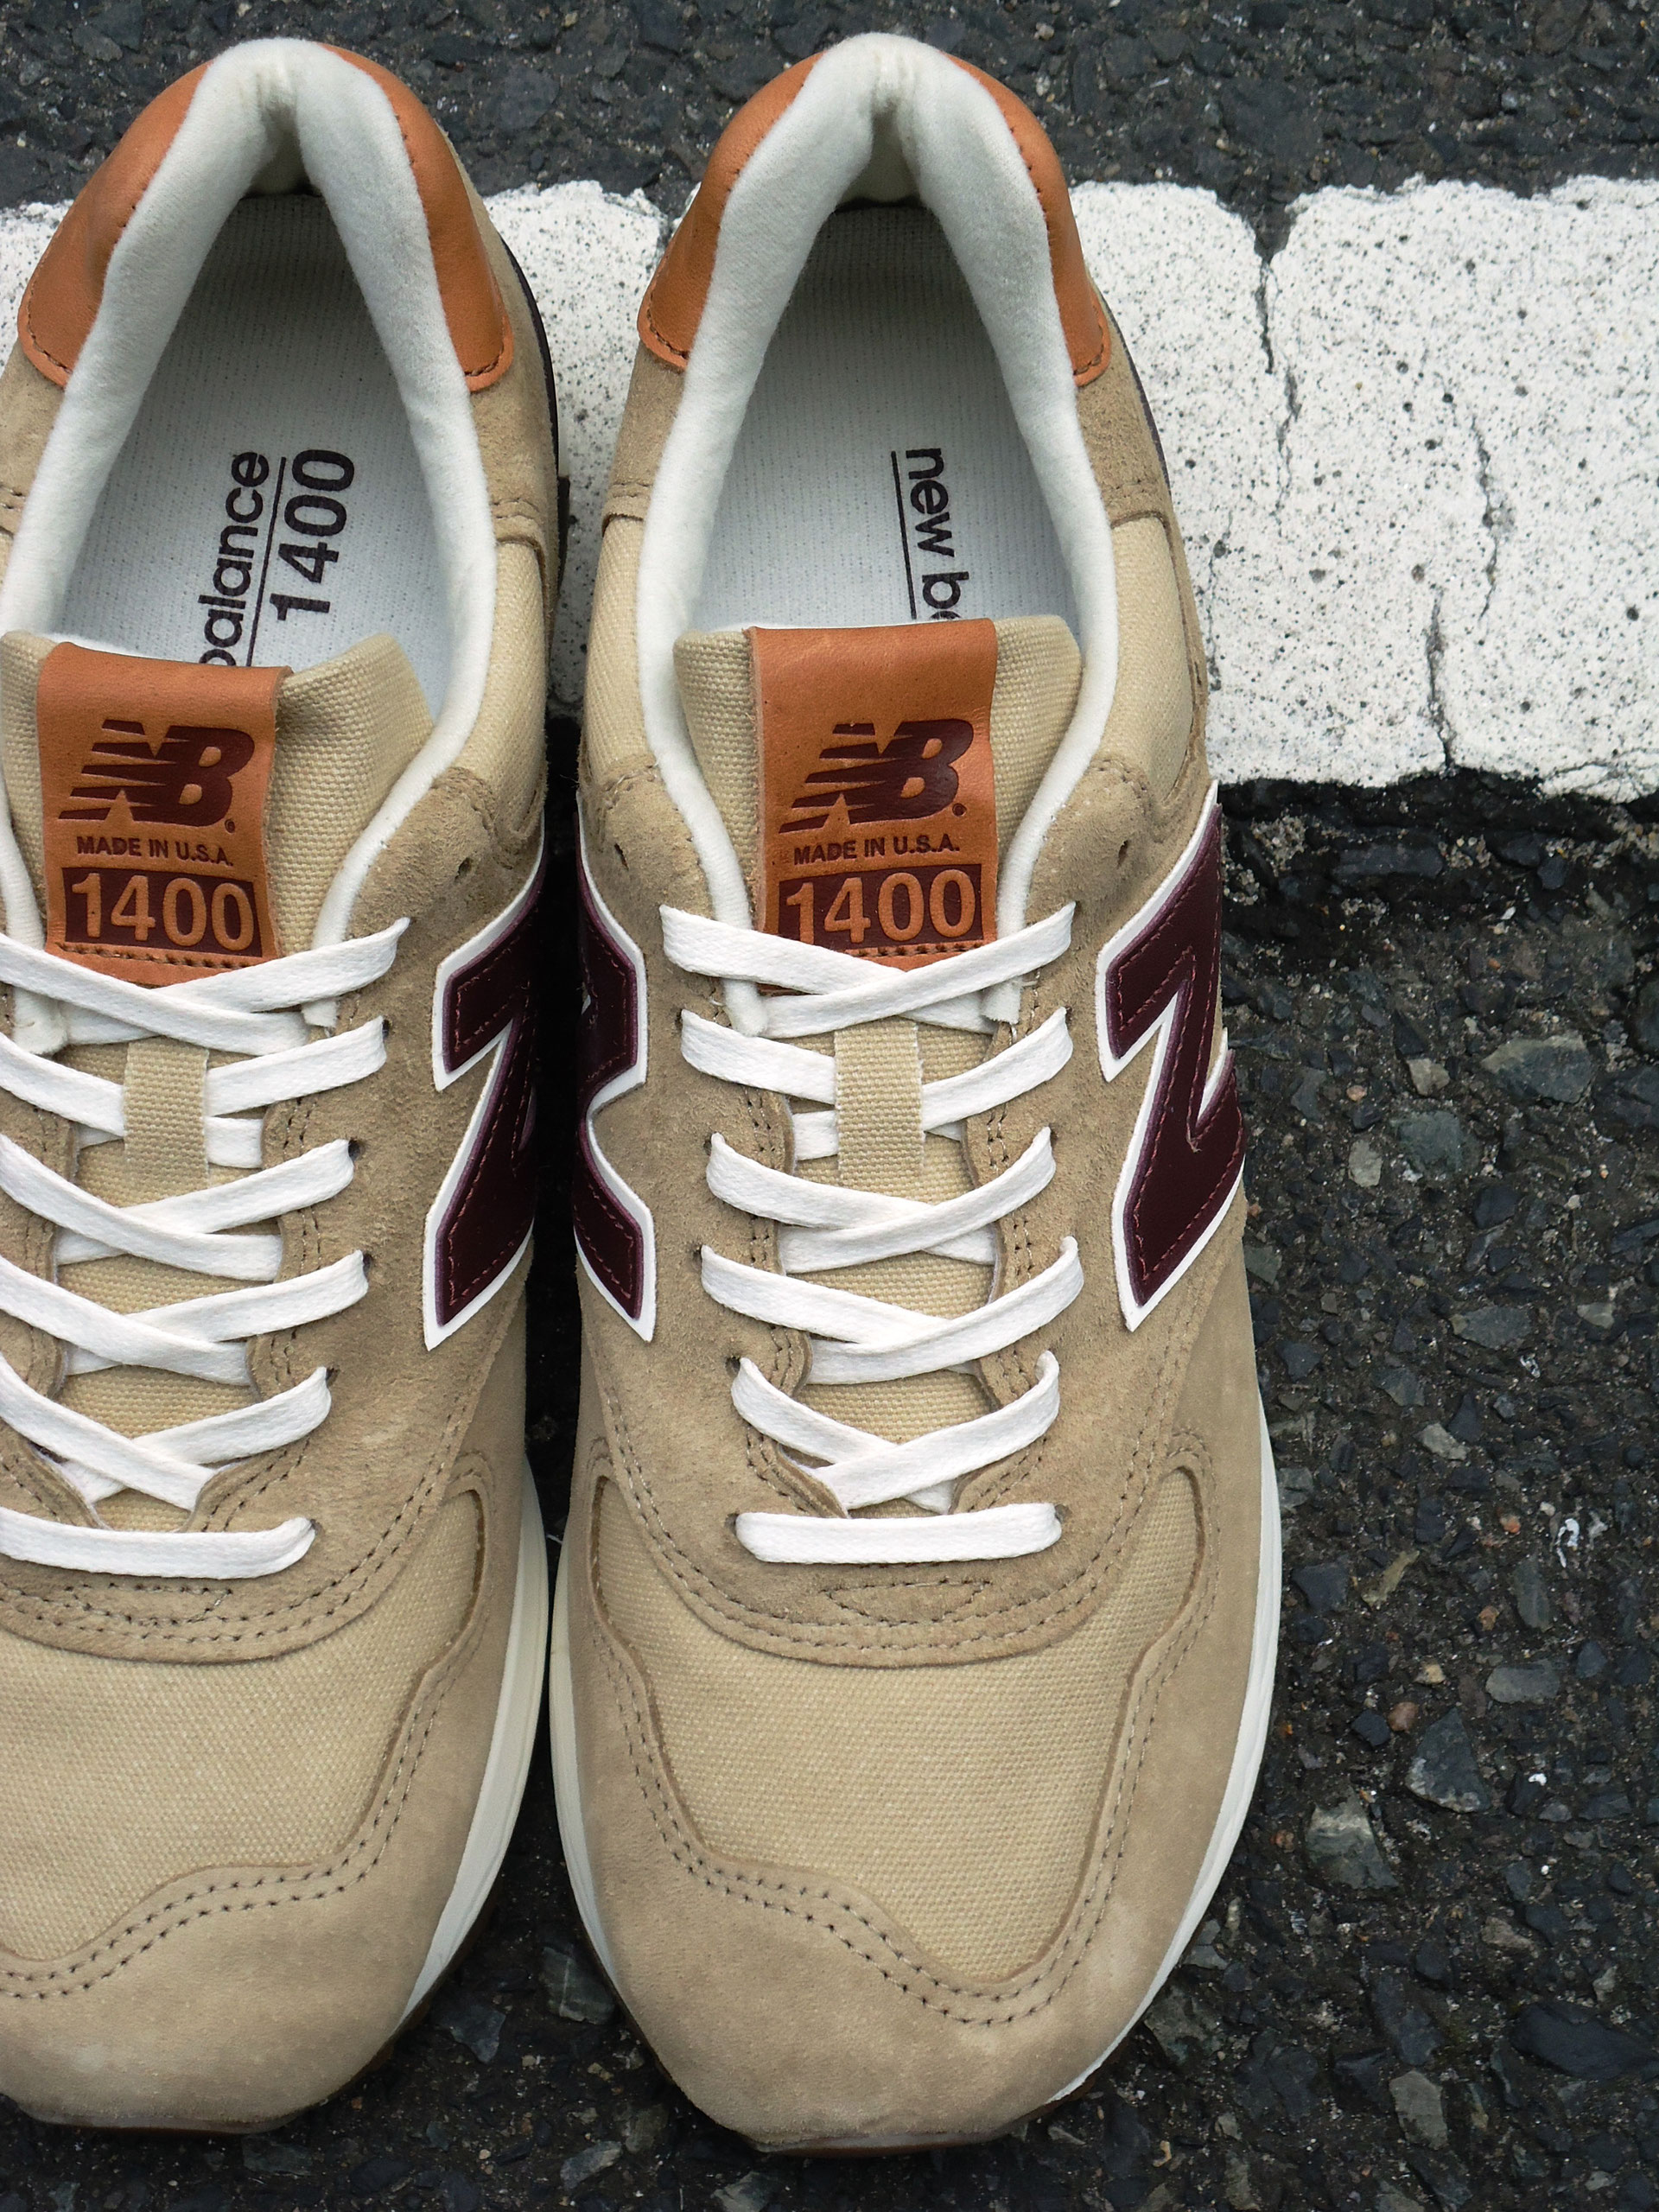 New balance M1400 beige <Made in USA> - GG-store